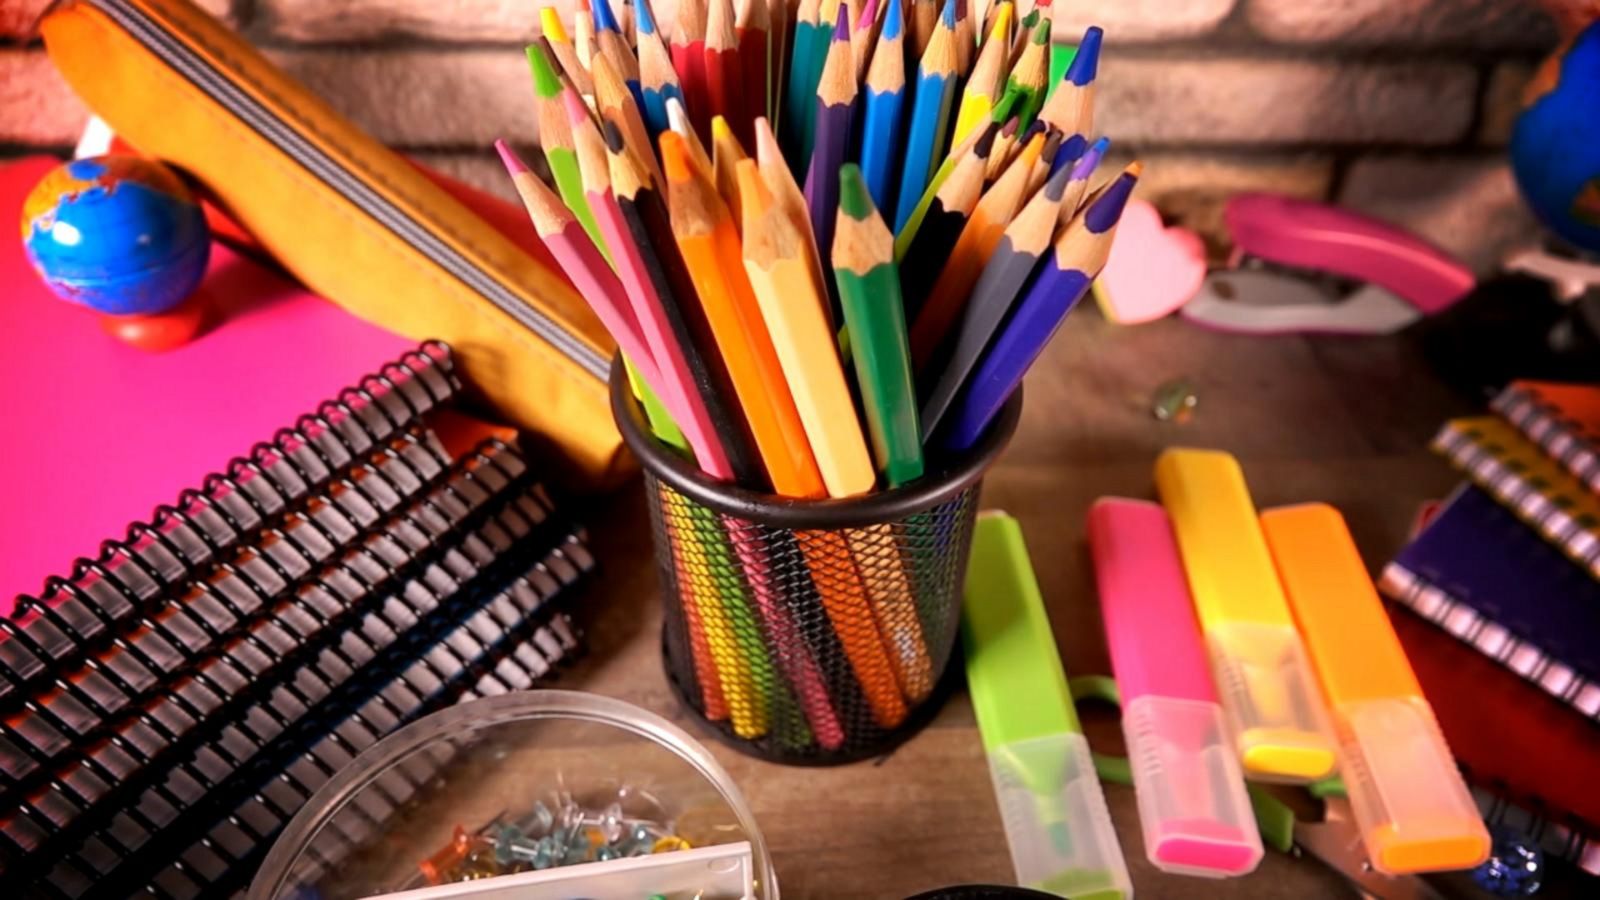 VIDEO: Where to find back-to-school deals